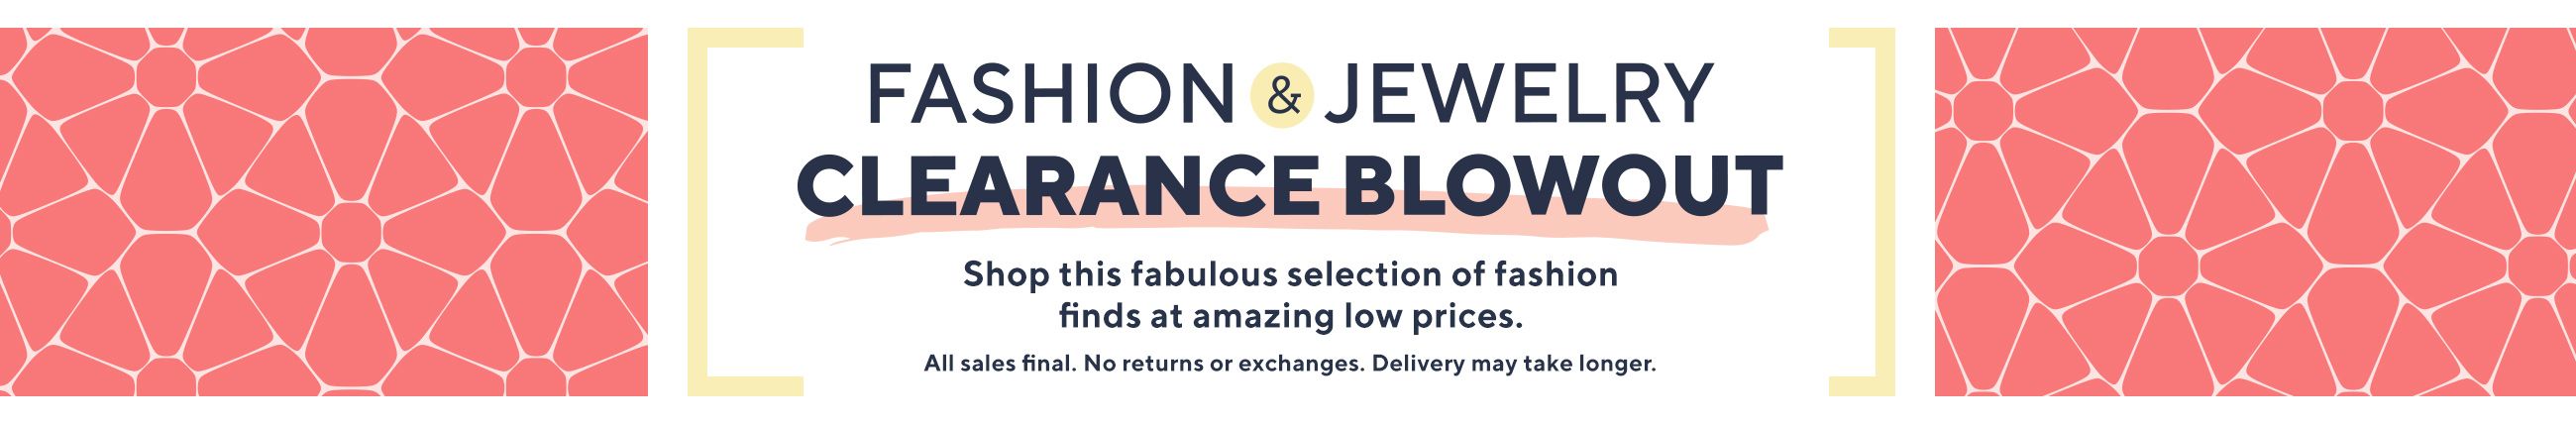 Fashion & Jewelry Clearance Blowout Shop this fabulous selection of fashion finds at amazing low prices. All sales final. No returns or exchanges. Delivery may take longer.